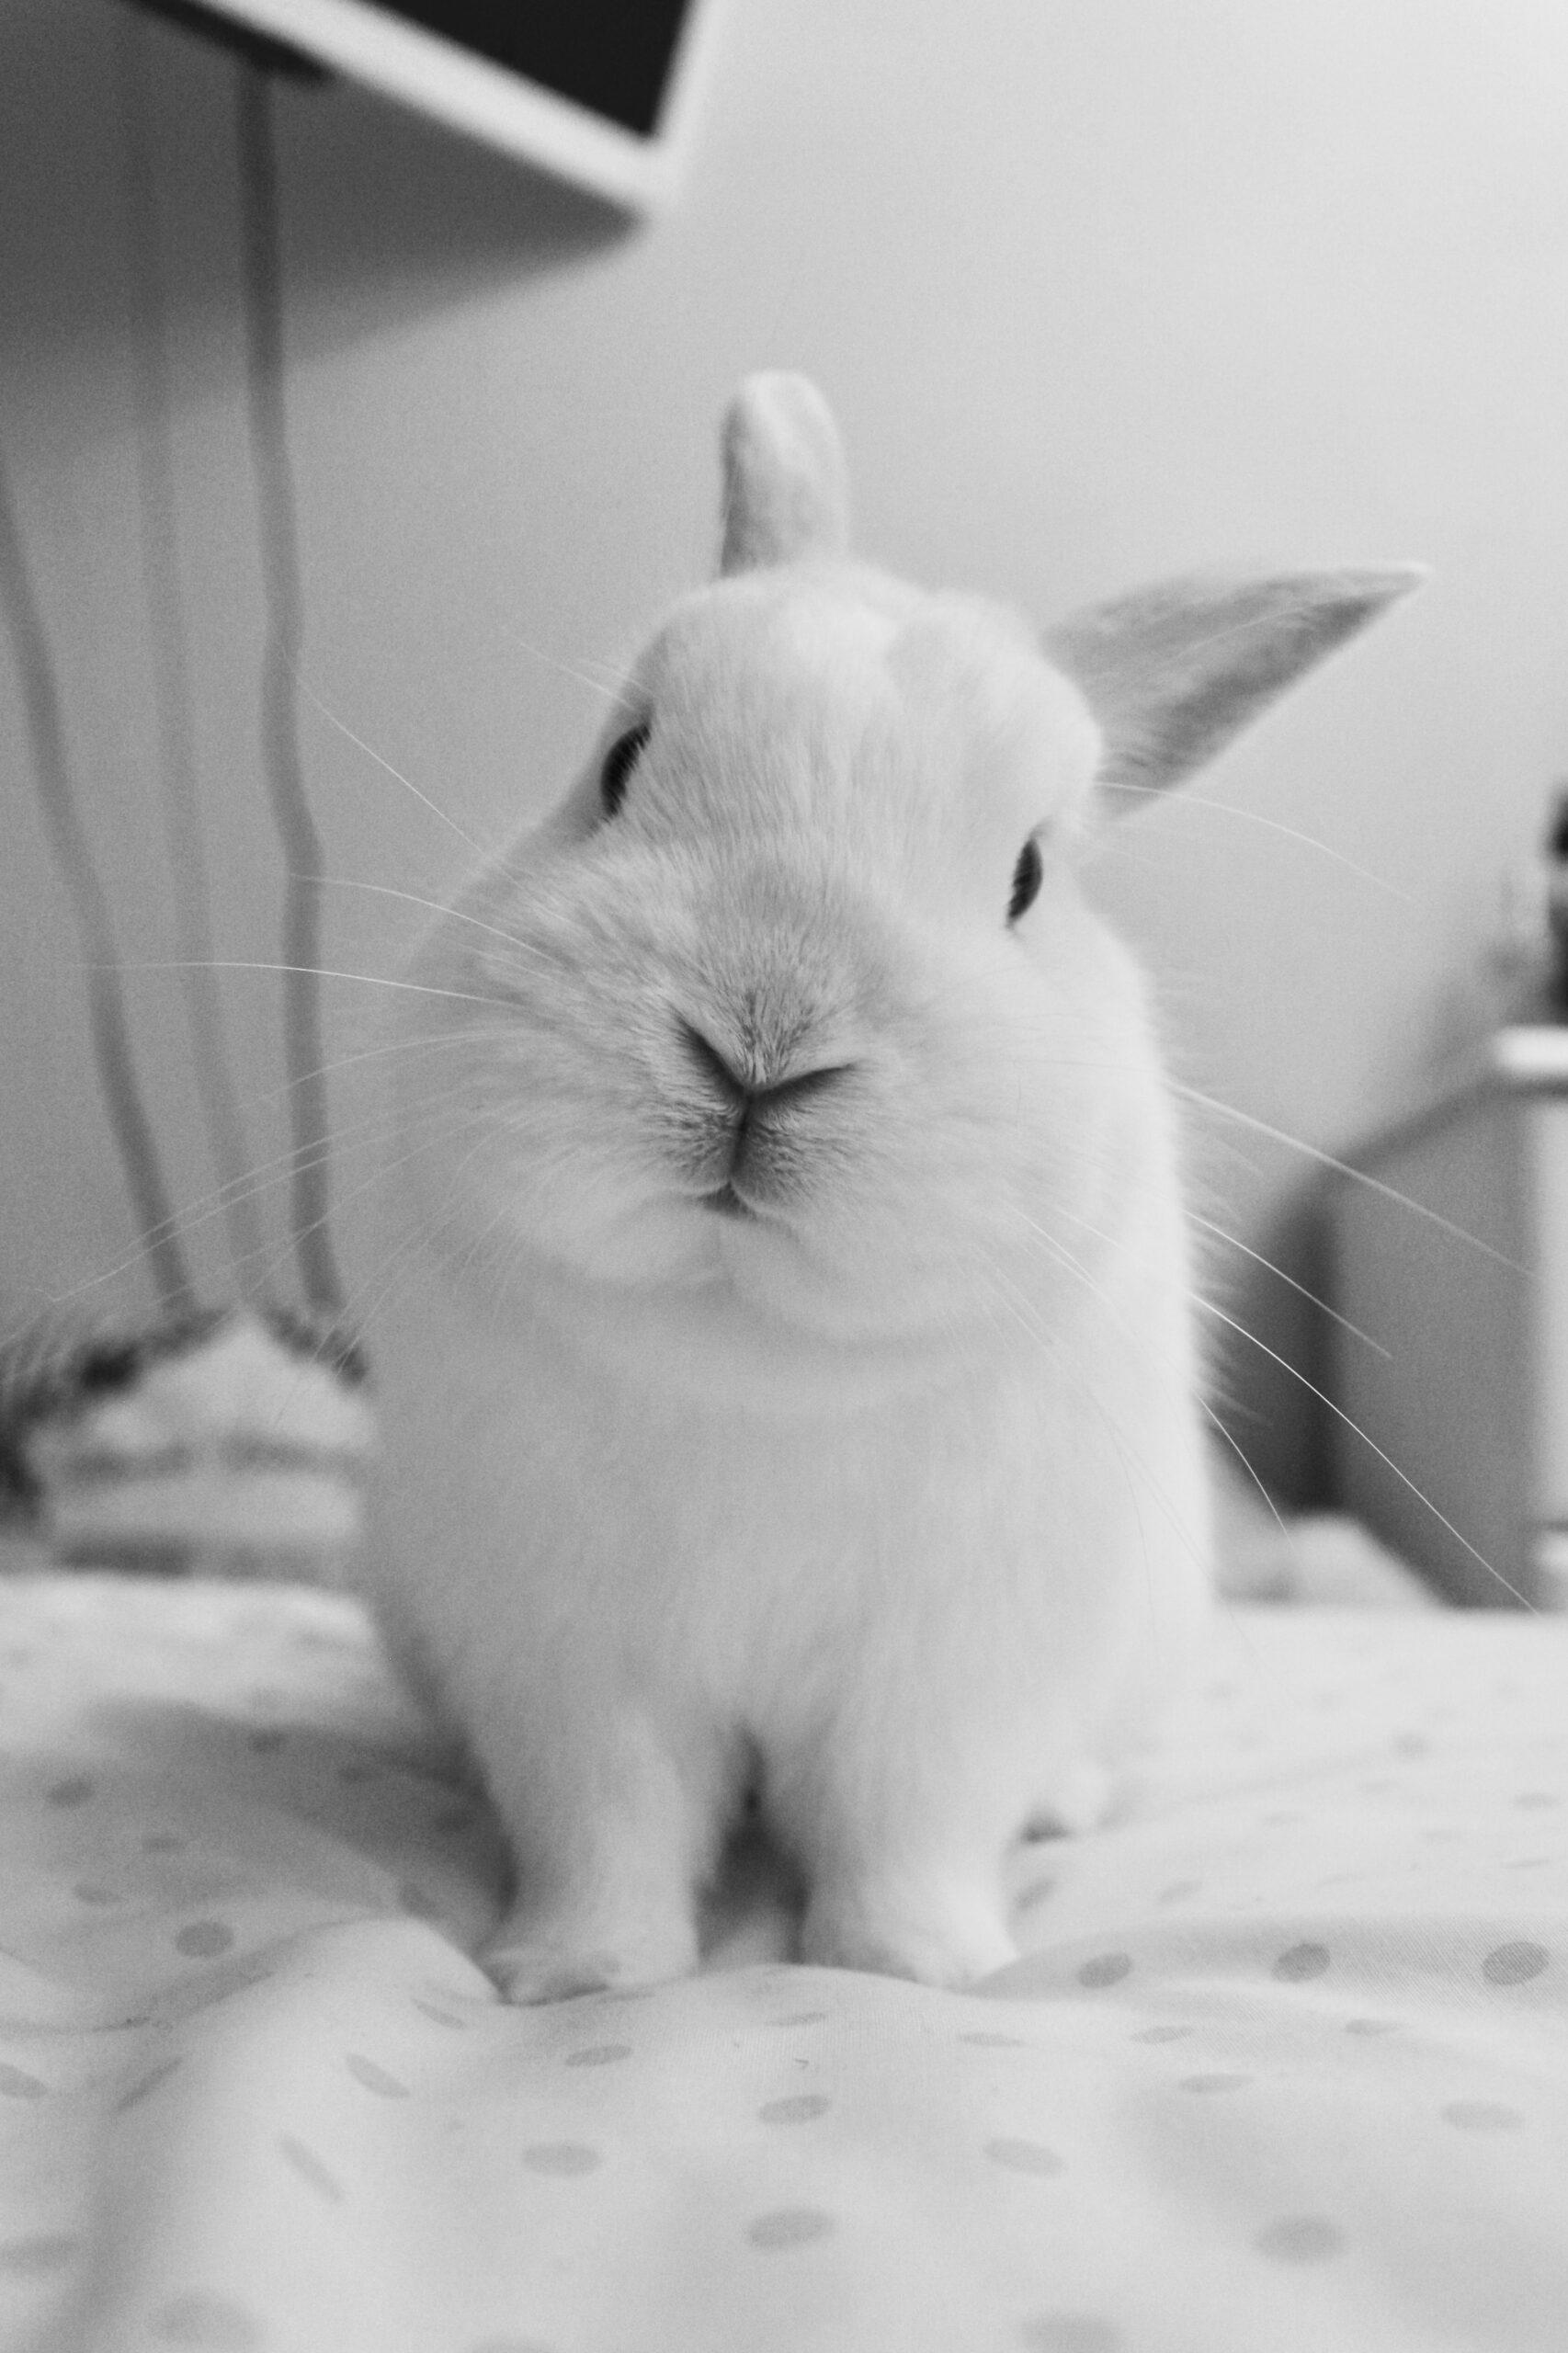 Can rabbits recognize faces?